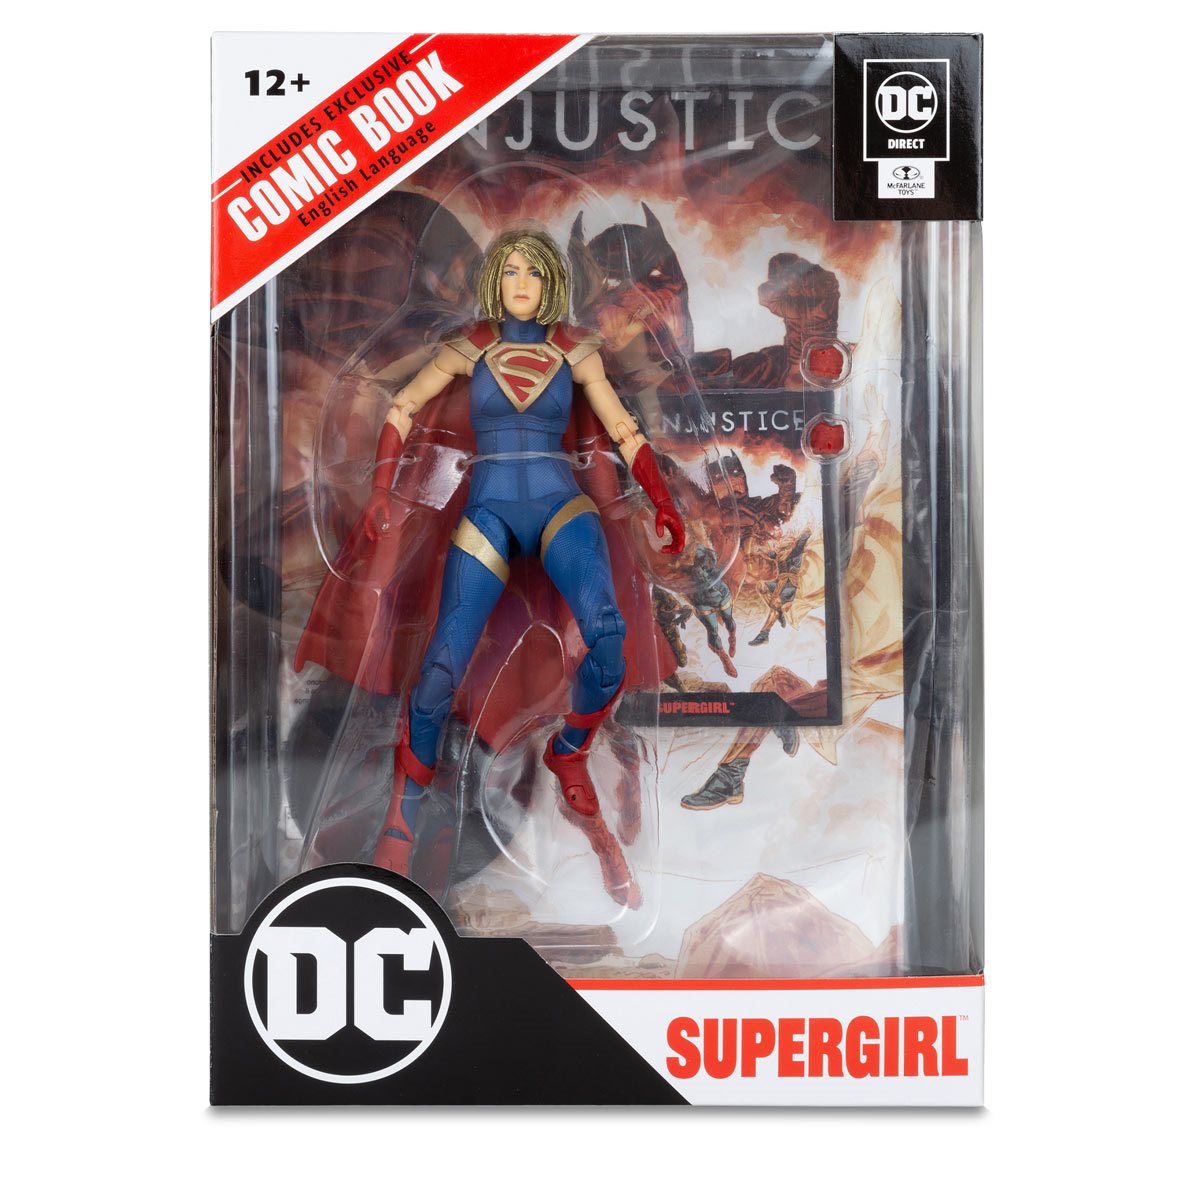 INJUSTICE 2 - Supergirl Action Figure Toy in a box - Heretoserveyou